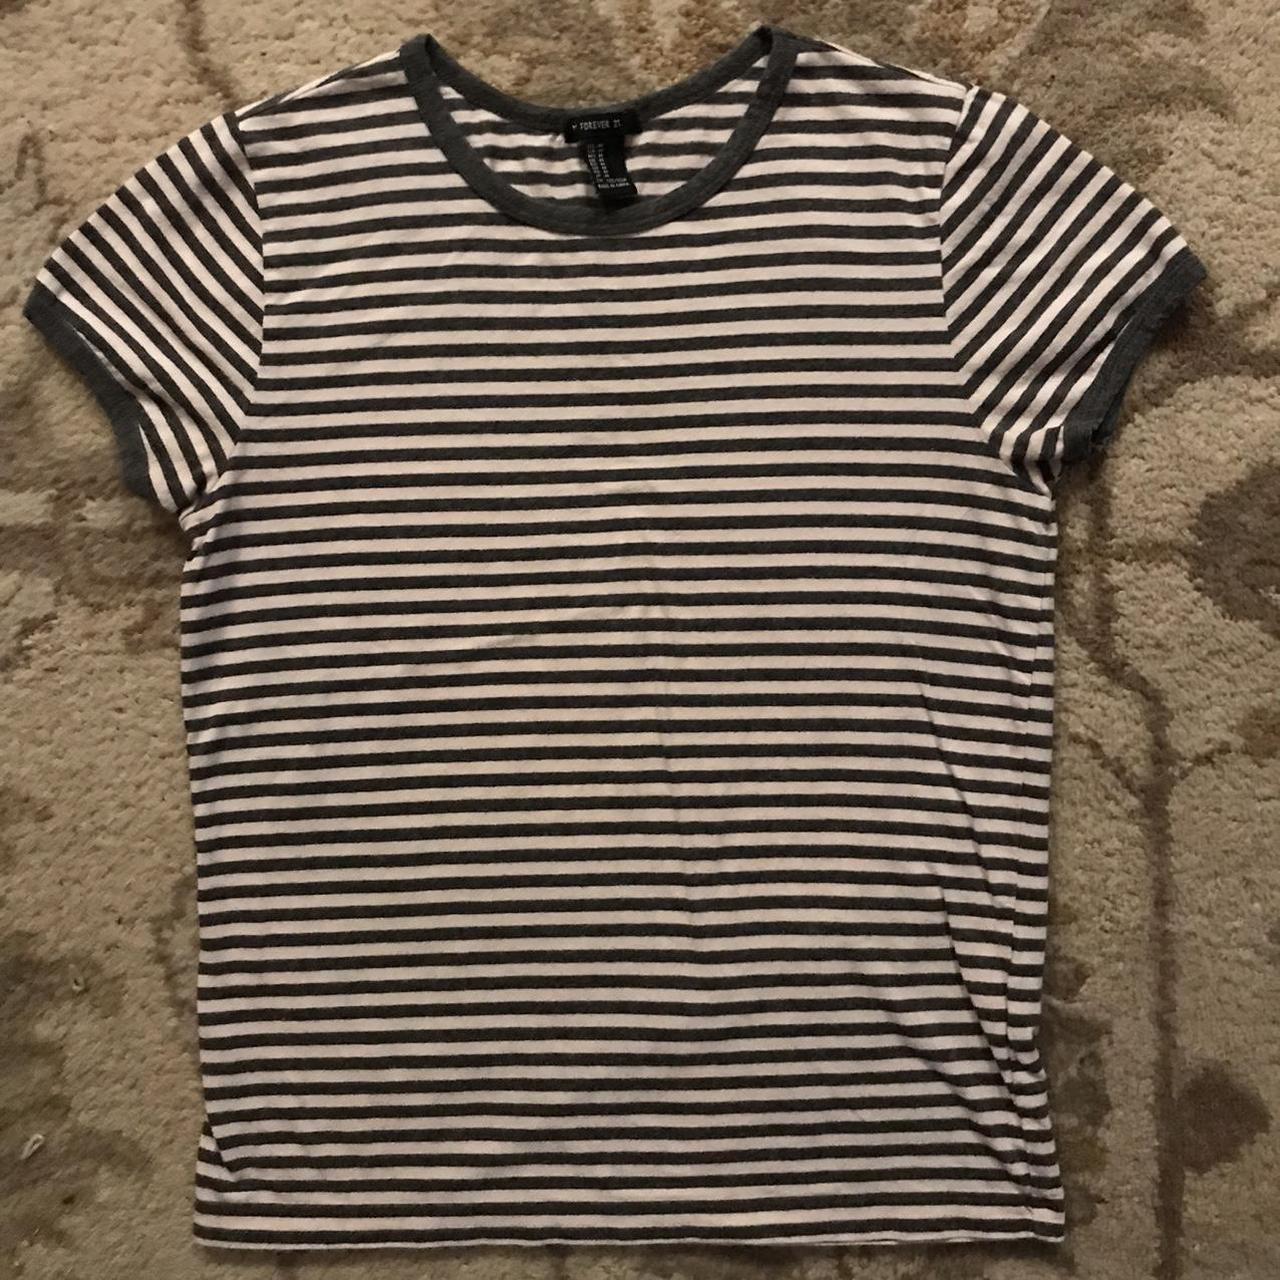 Product Image 1 - Vintage Aesthetic Striped Top
Brand New